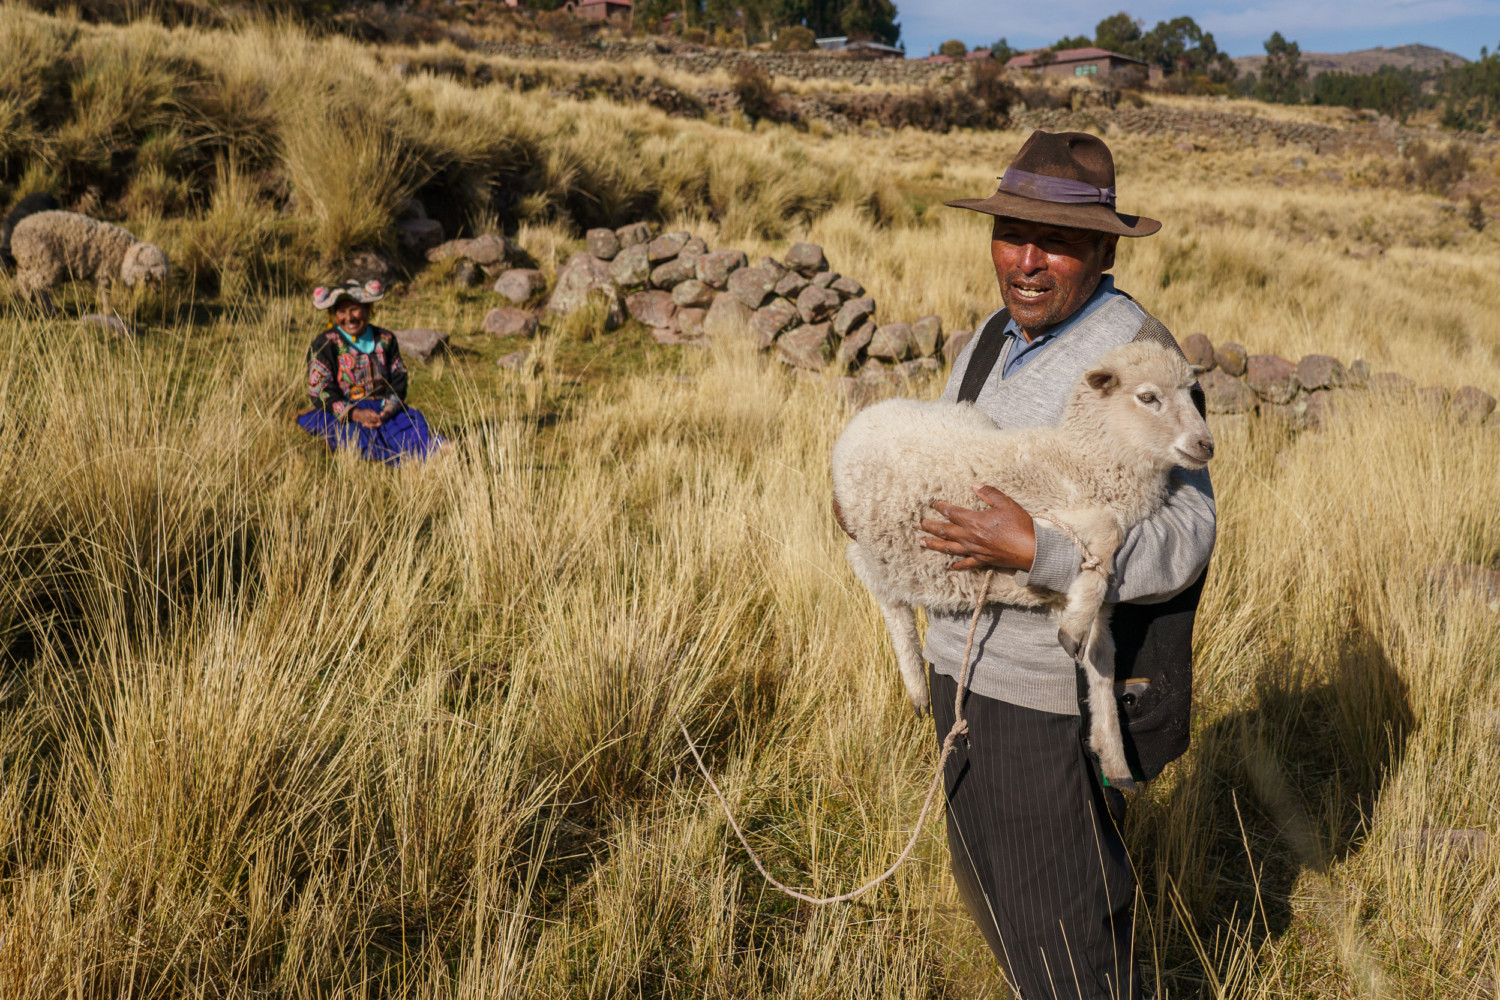 Local Peruvian husband and wife tending to their livestock | Peru Photo Tour with raw.tours